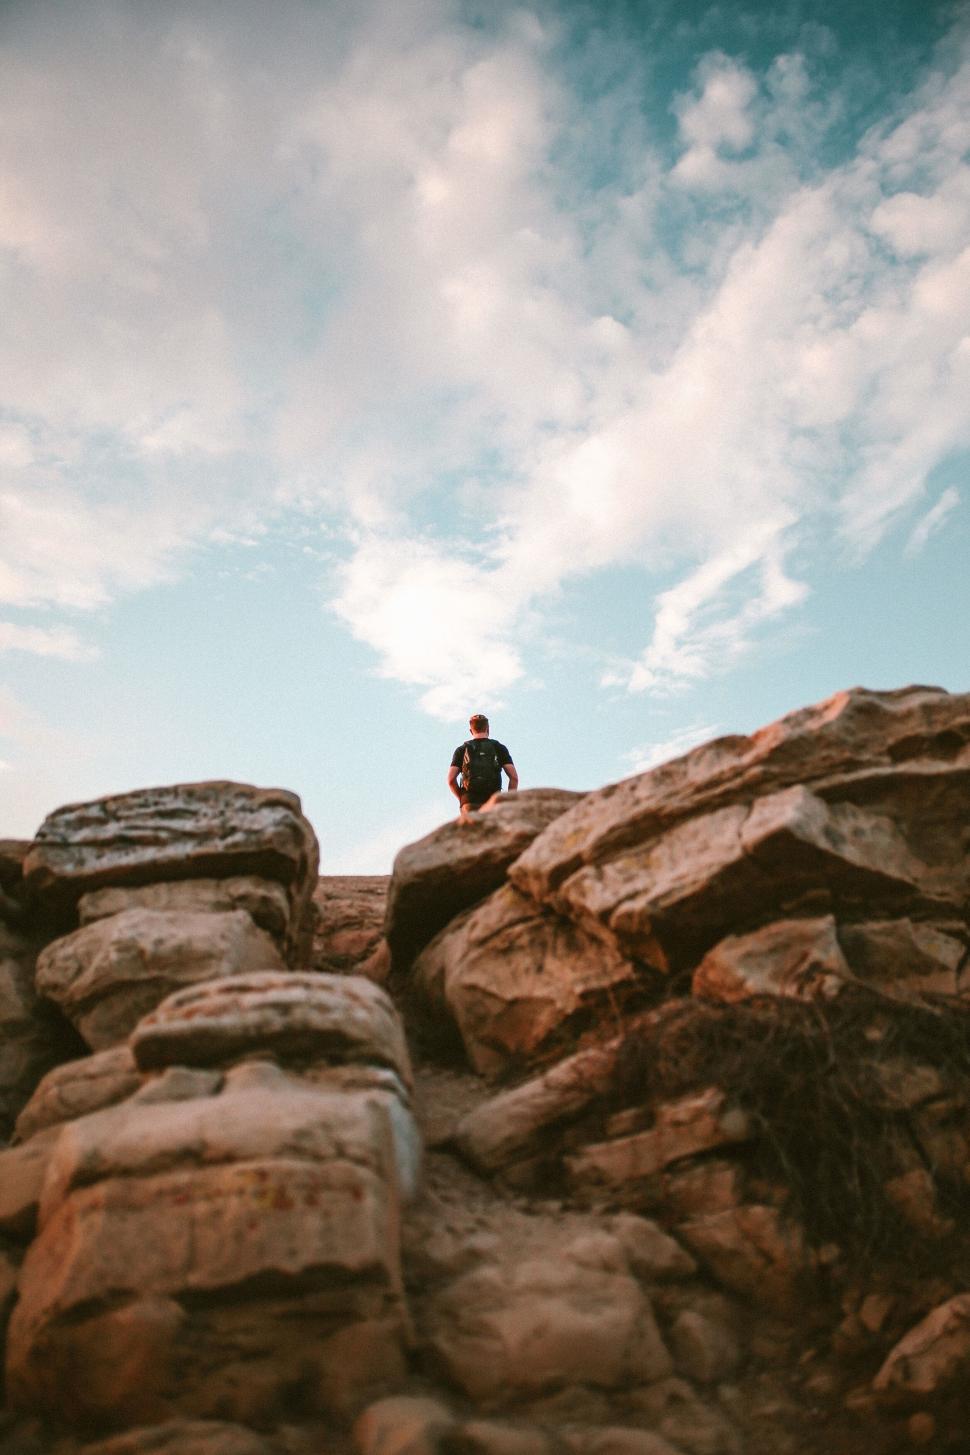 Free Image of Solitary person sitting on rocky cliff at sunset 